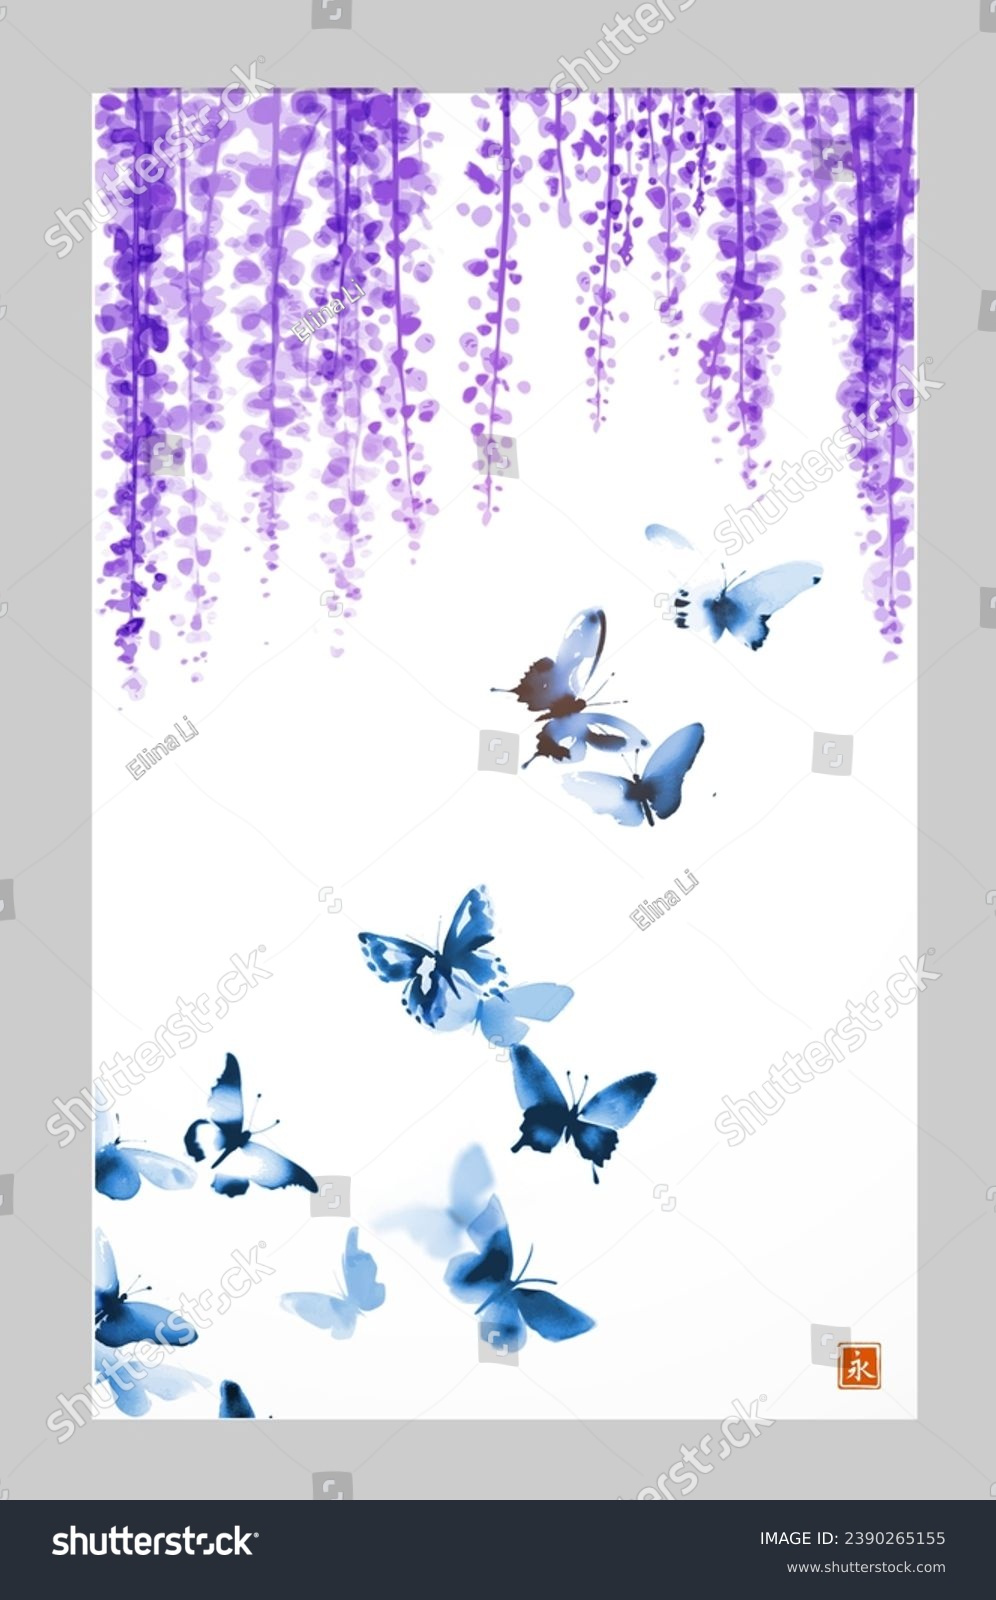 SVG of Sumi-e style illustration of cascading wisteria and flying butterflies on a white background. Translation of hieroglyph - eternity. svg